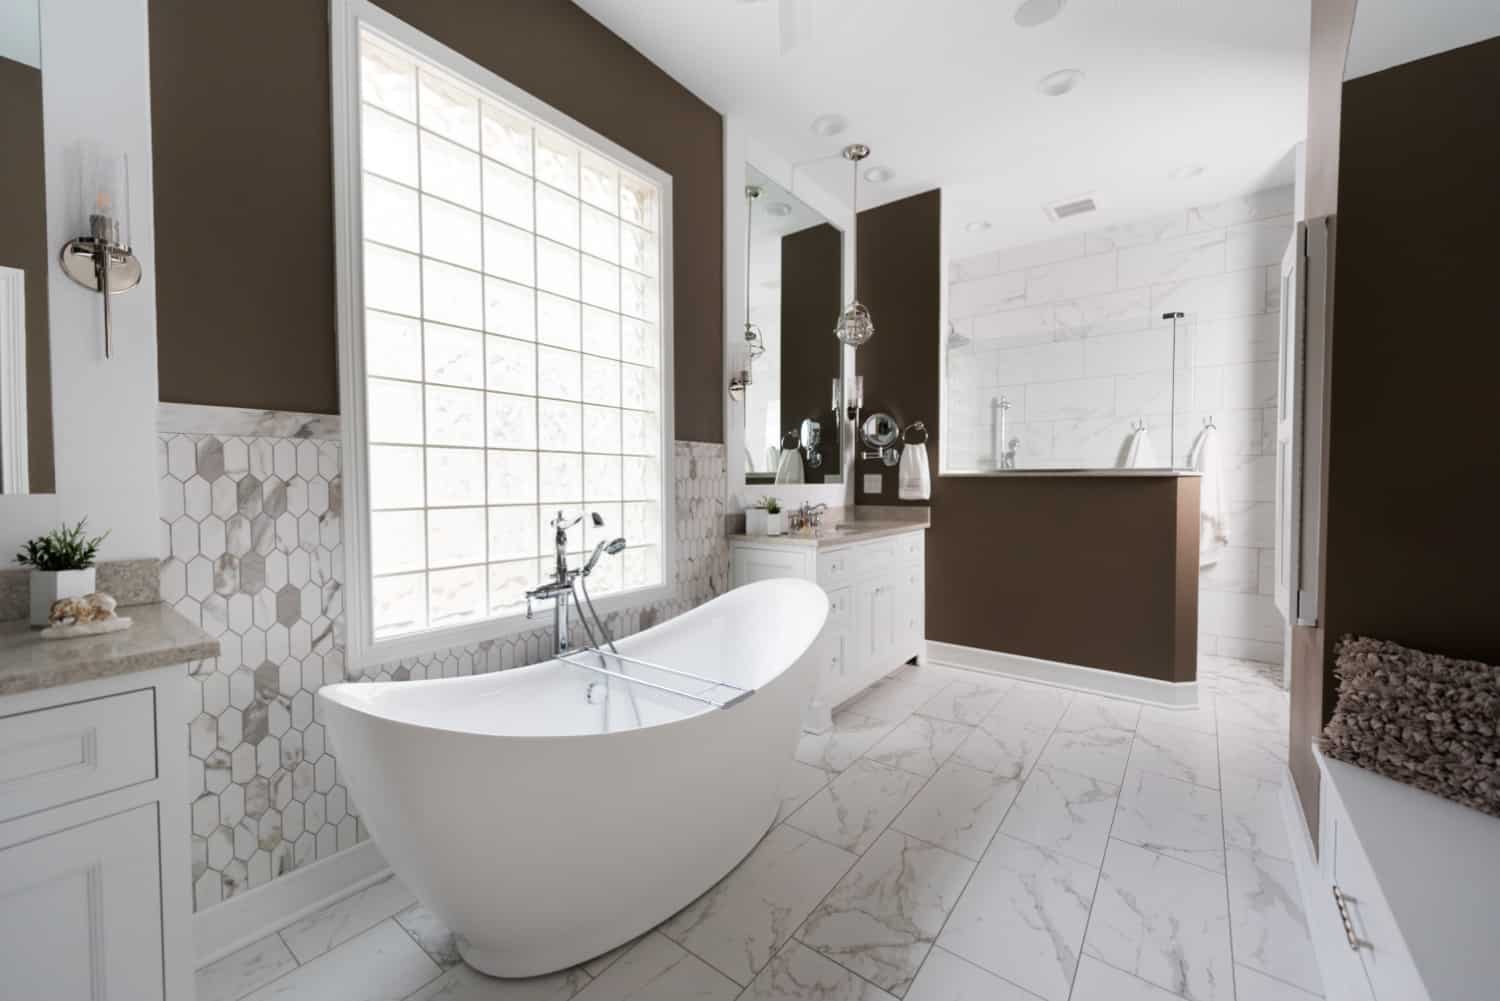 Nicholas Design Build | A white and brown bathroom with a large tub, creating an oasis-like atmosphere.